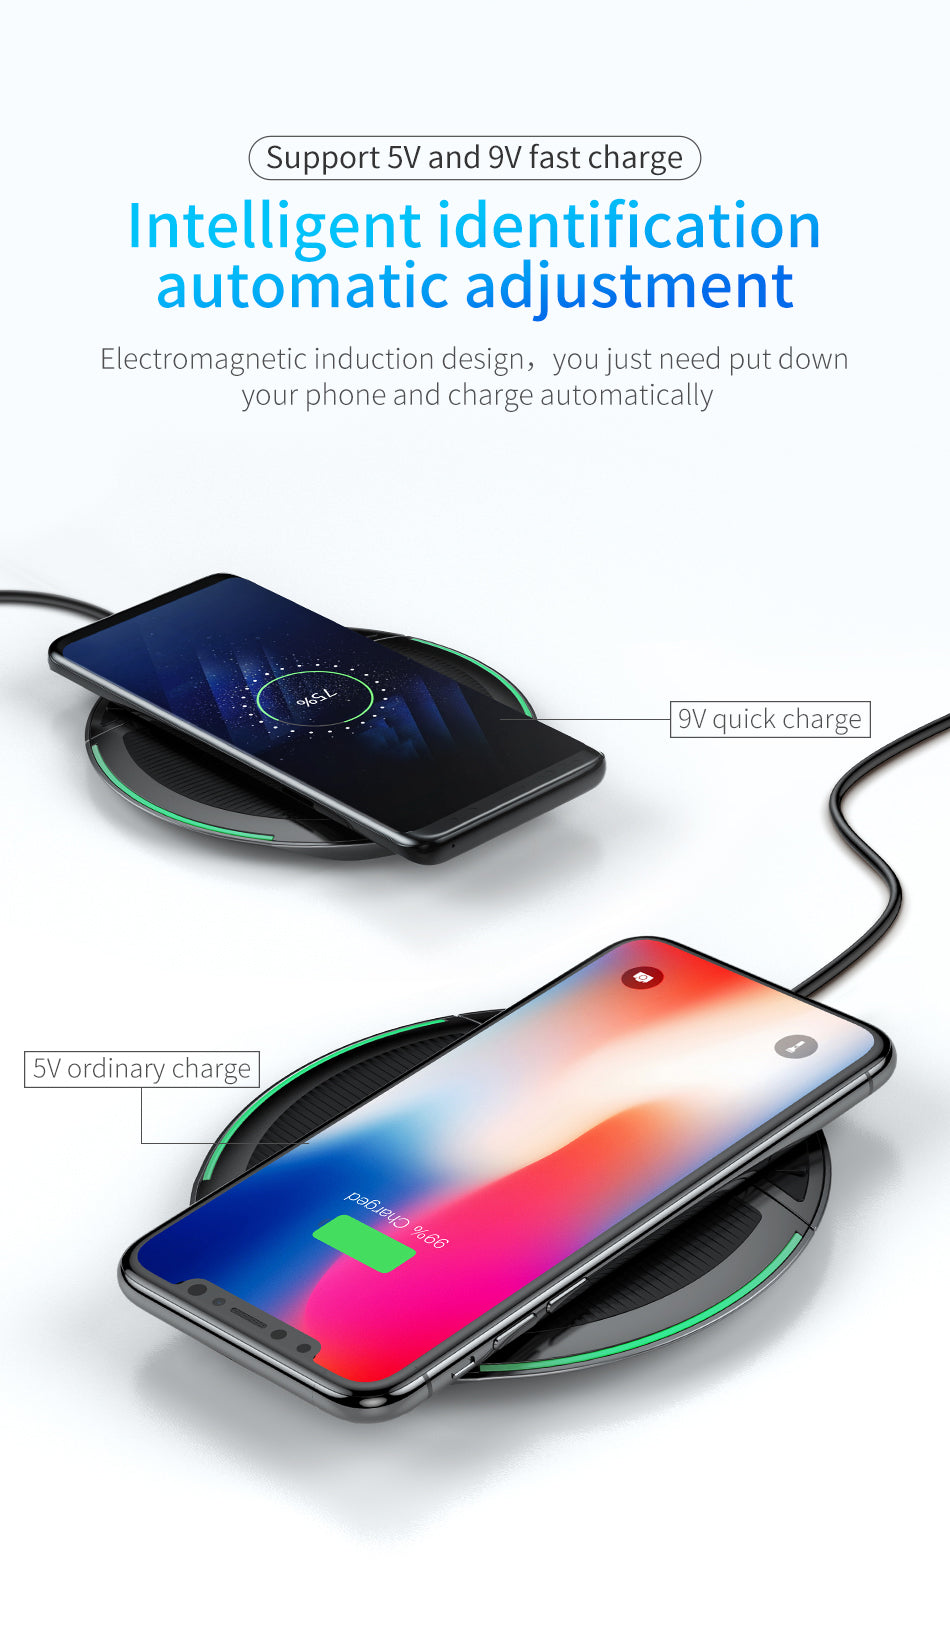 Collapsible Qi Wireless Charger By Baseus Multifunction Fast Wireless Charging Black